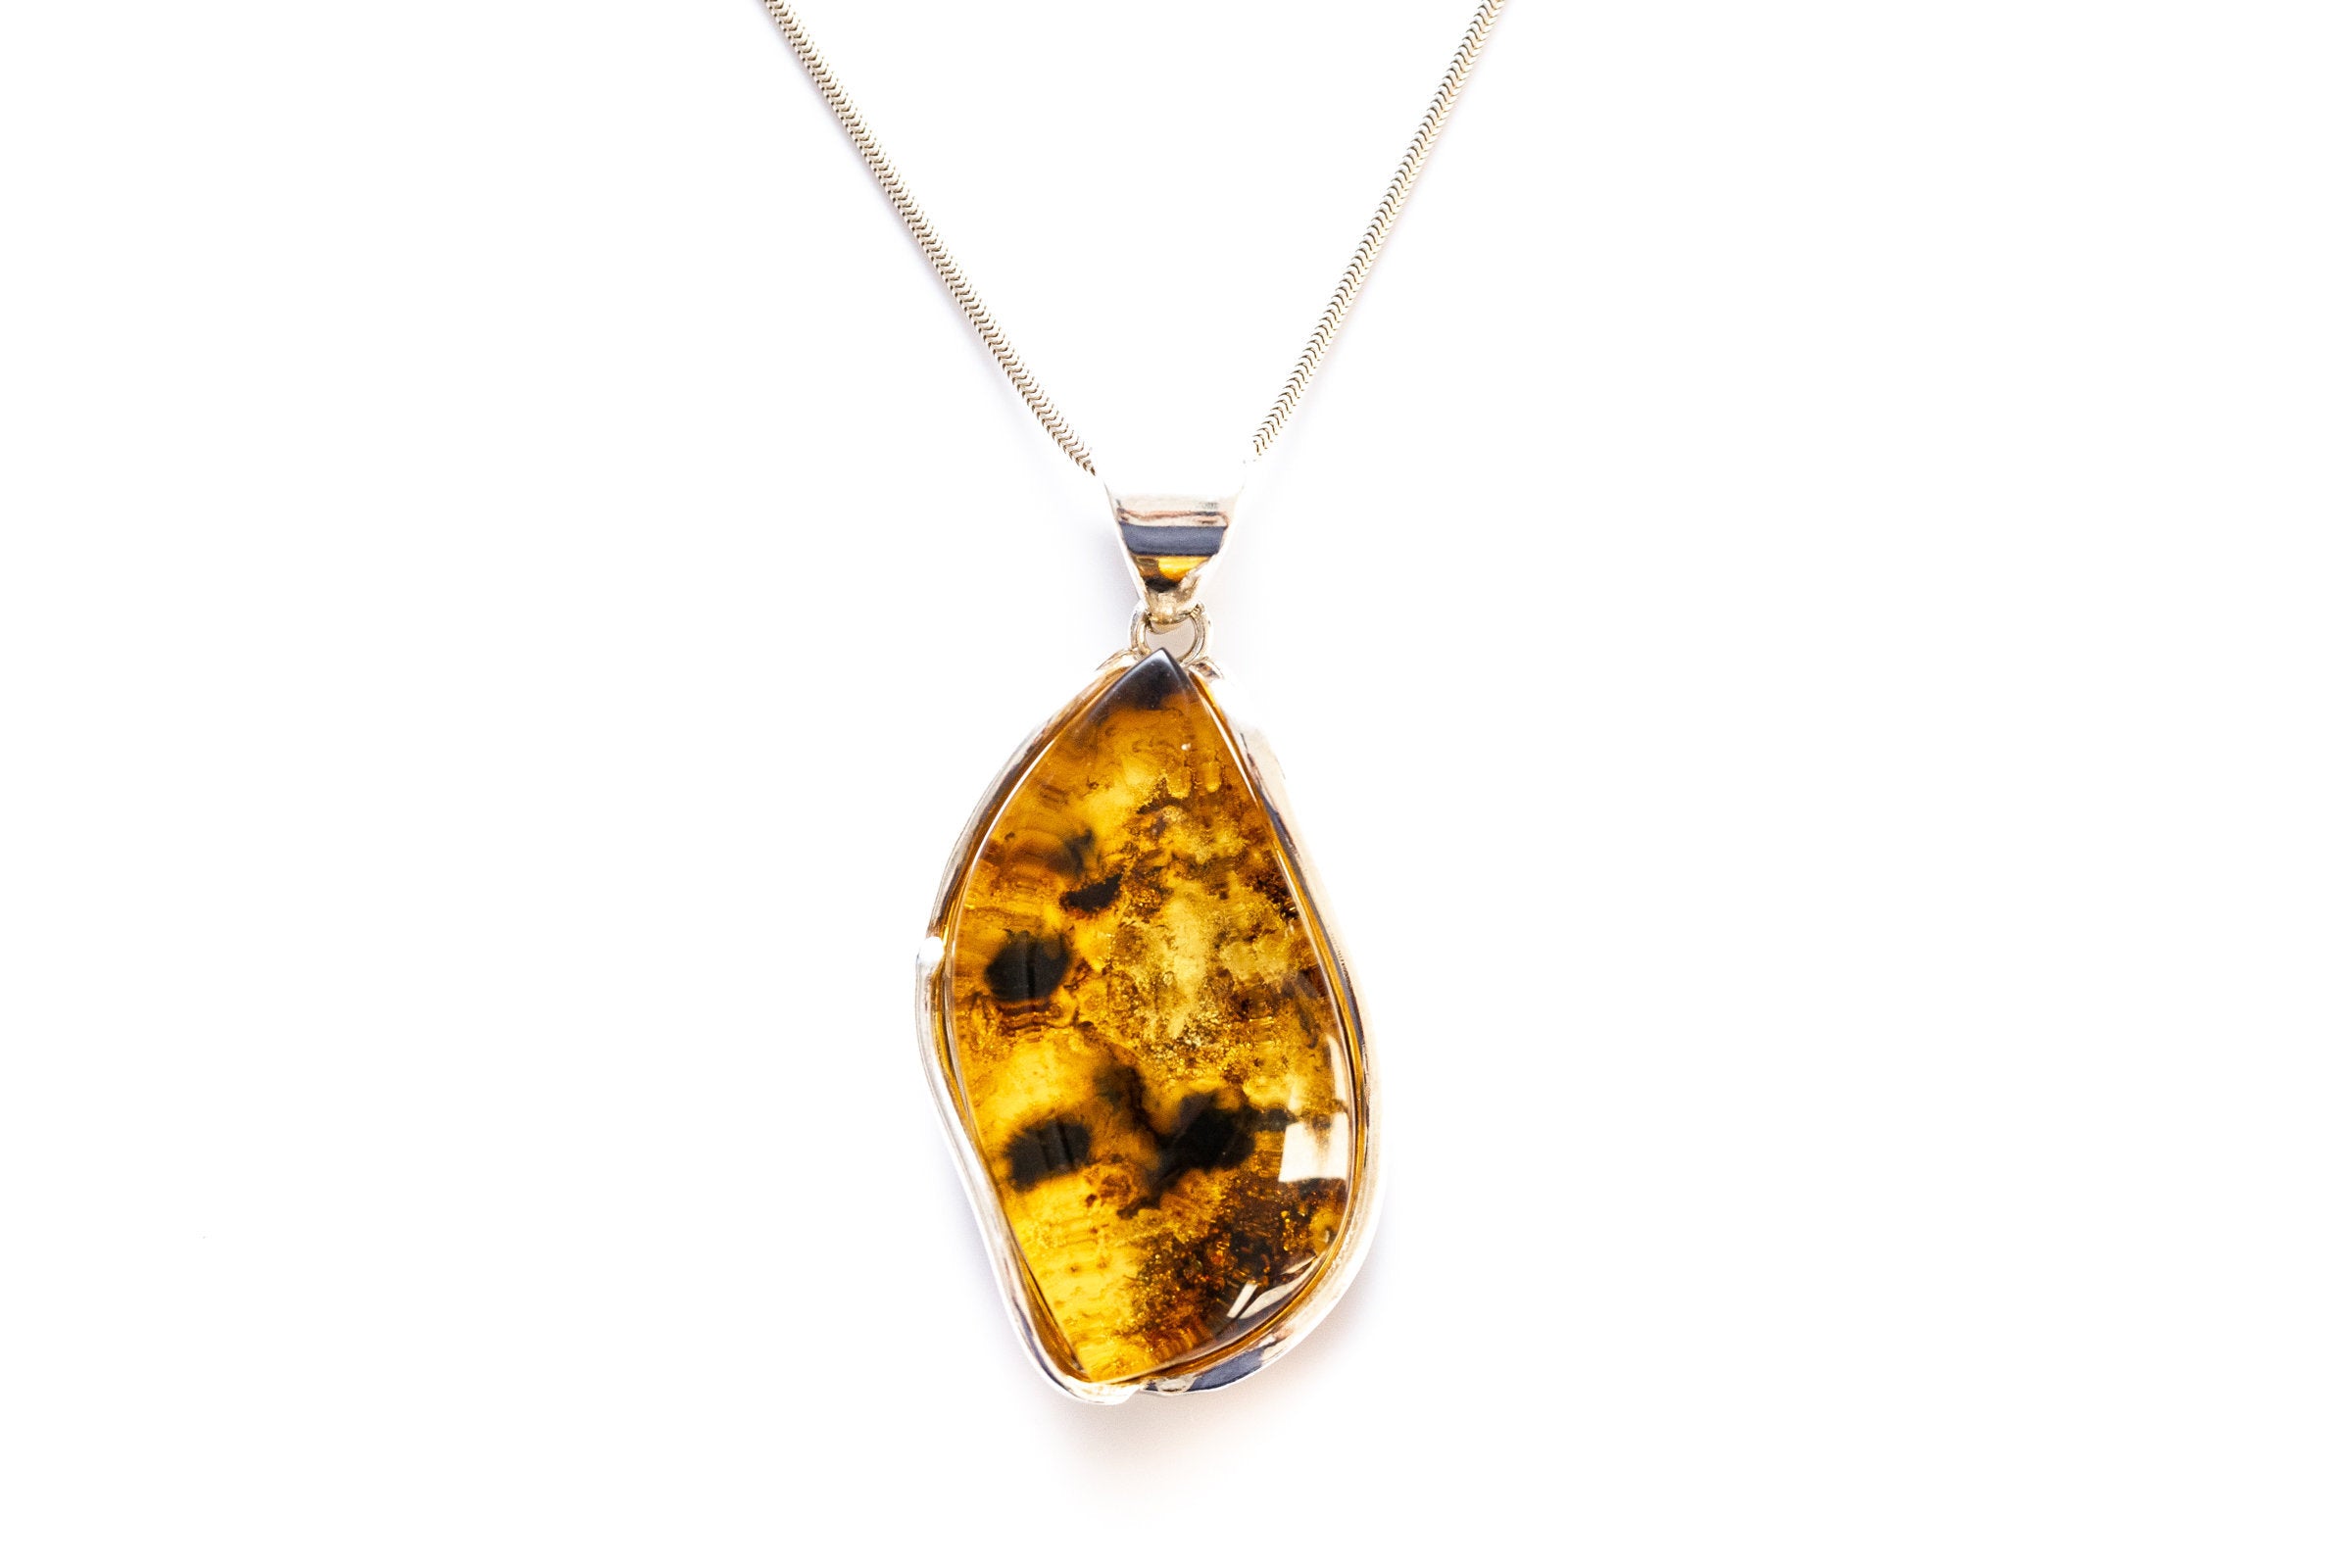 Handmade Tiger Speckled Amber Pendant- Necklaces- Baltic Beauty